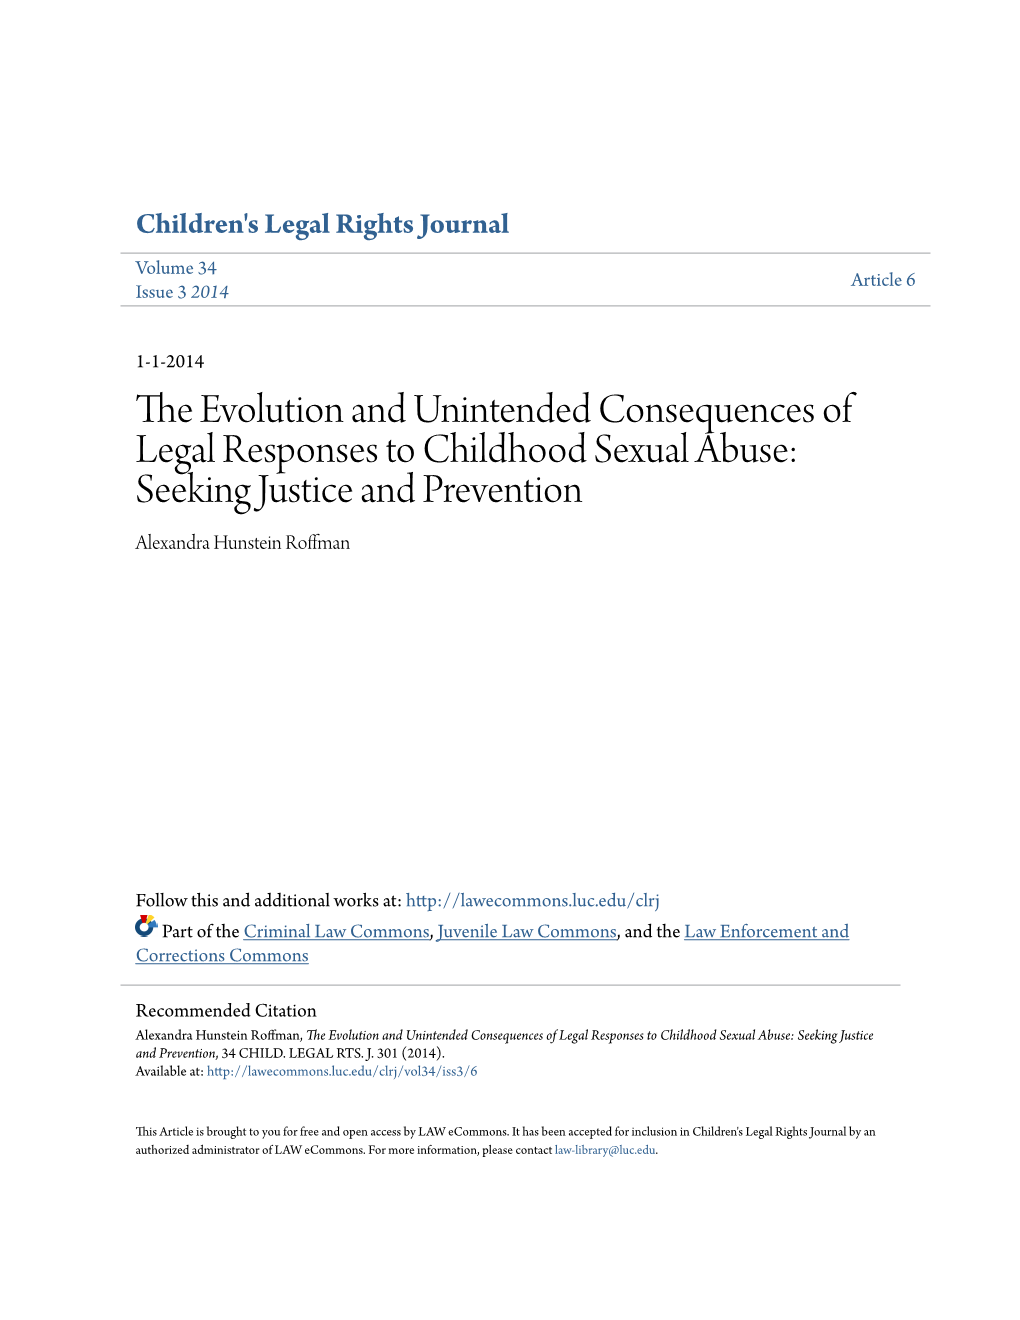 The Evolution and Unintended Consequences of Legal Responses to Childhood Sexual Abuse: Seeking Justice and Prevention, 34 CHILD